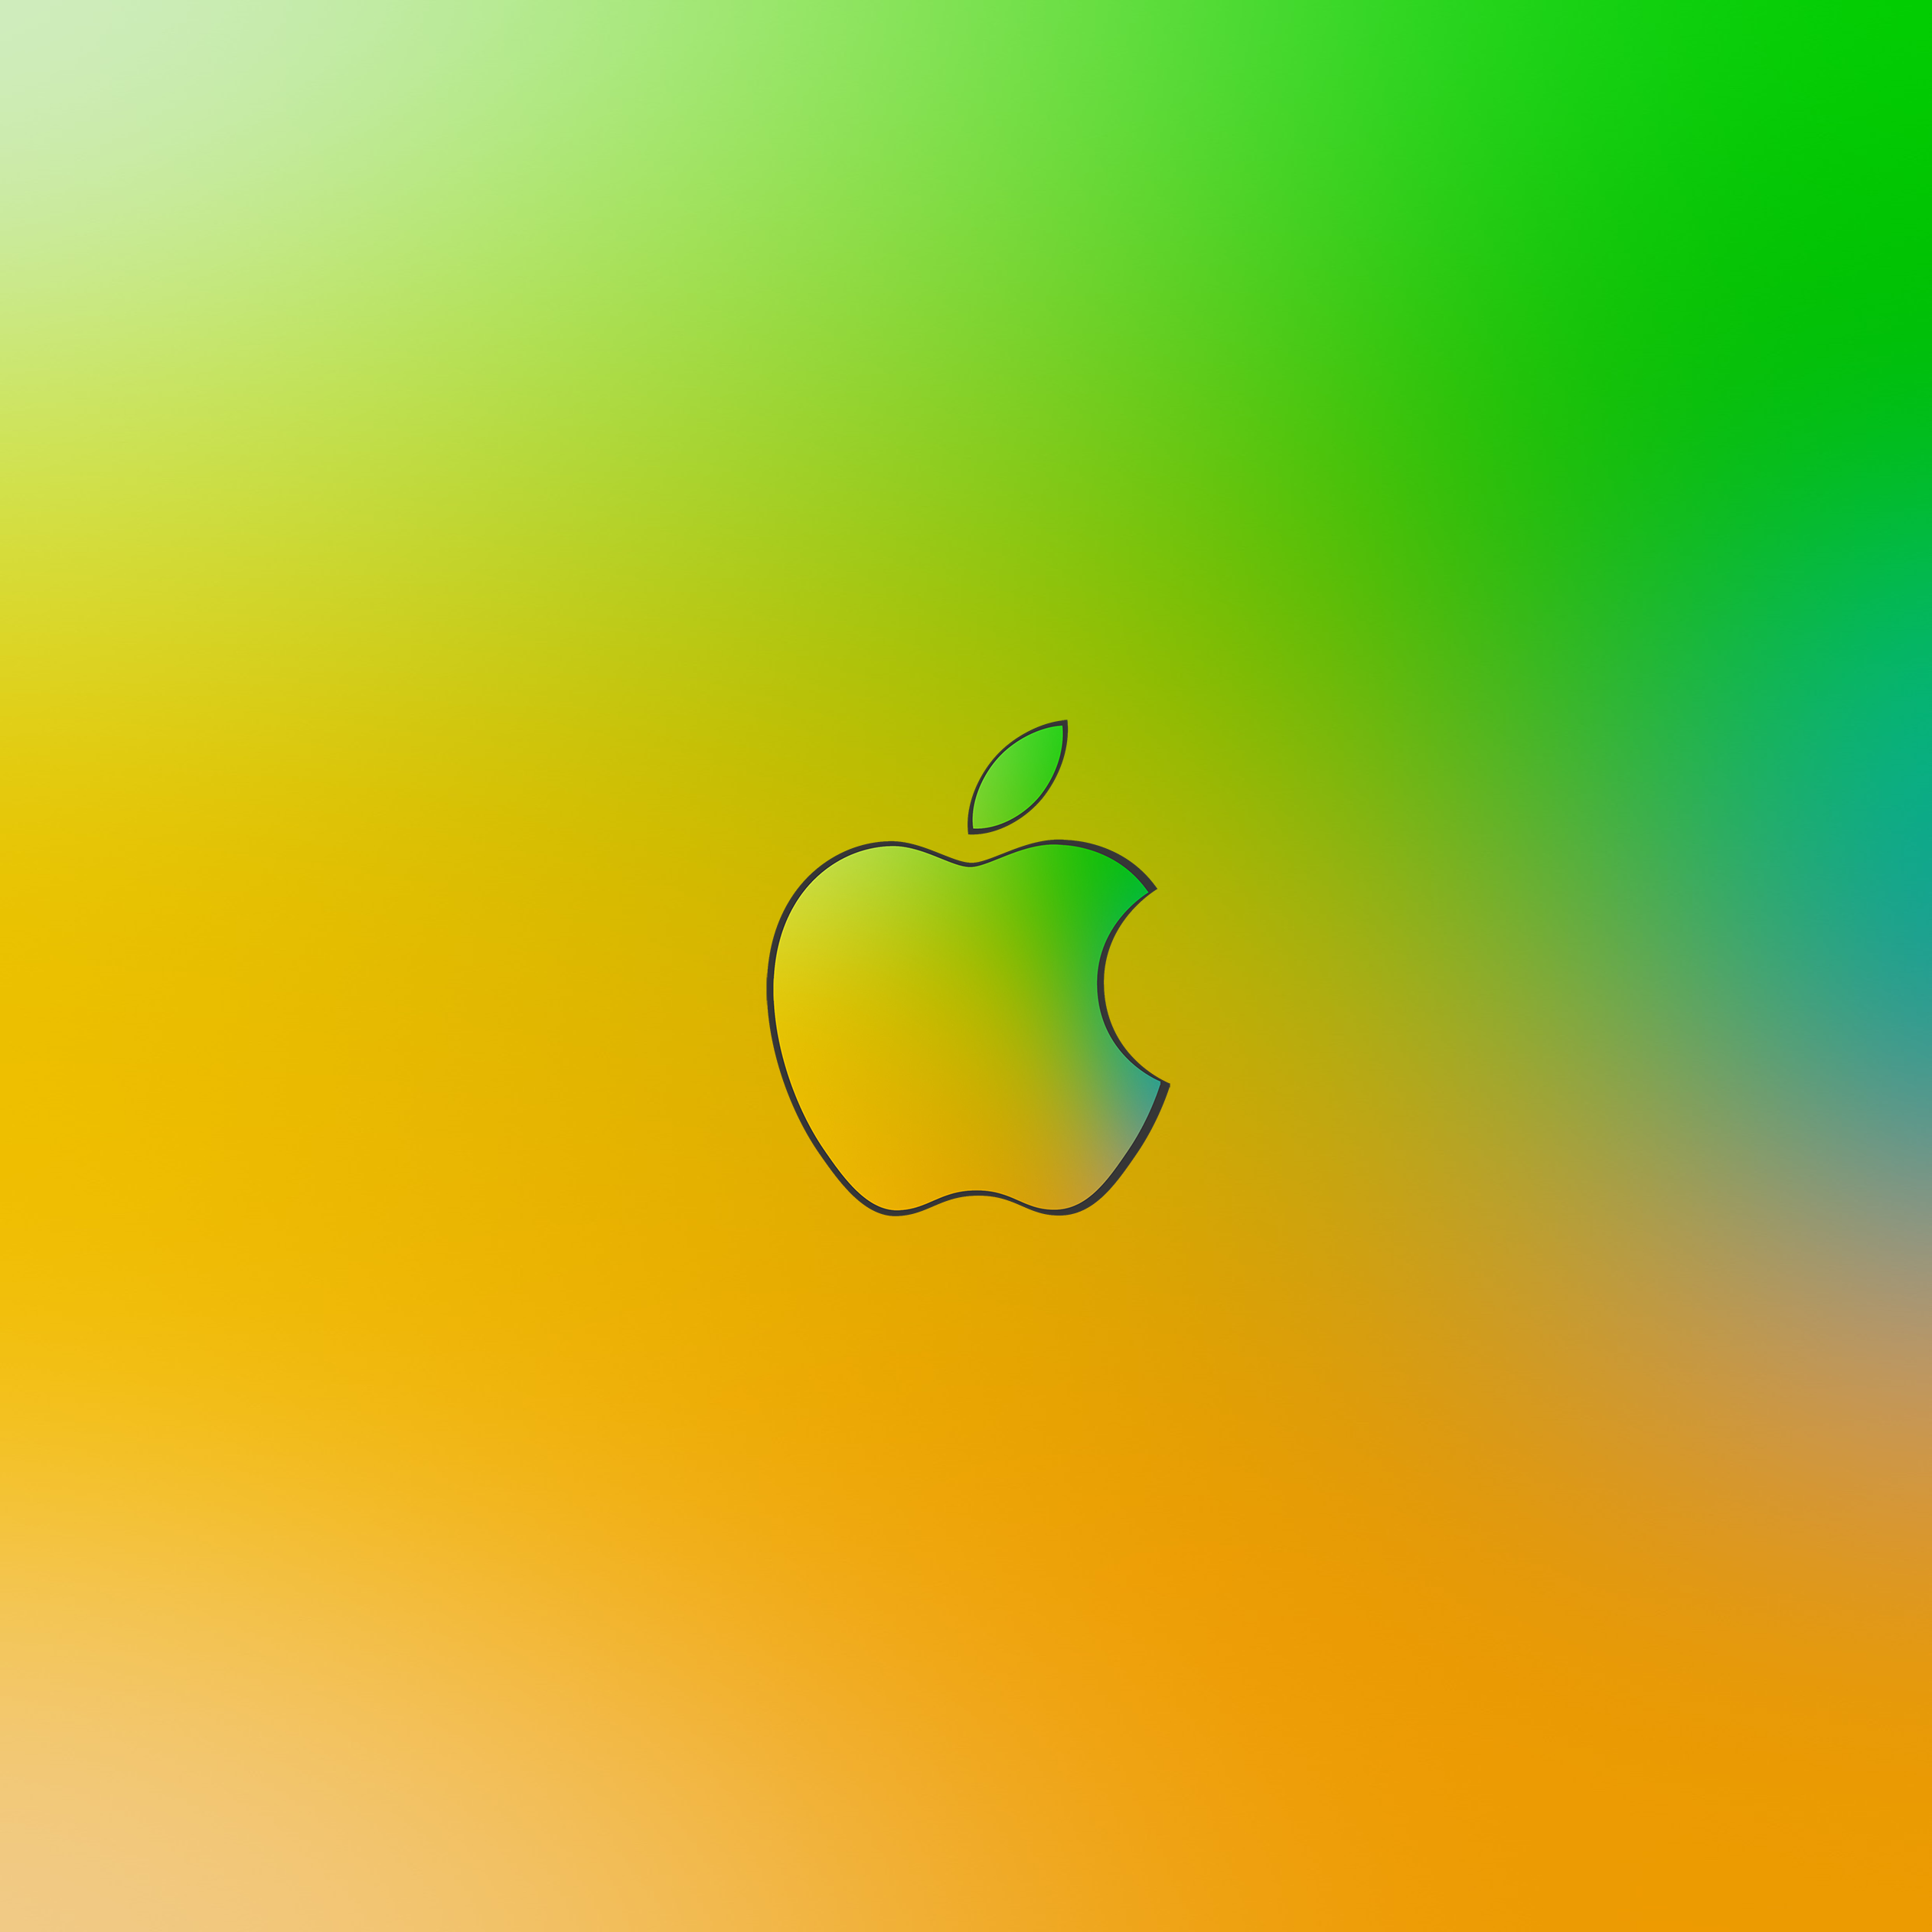 Apple Card wallpaper for iPhone, iPad, and desktop